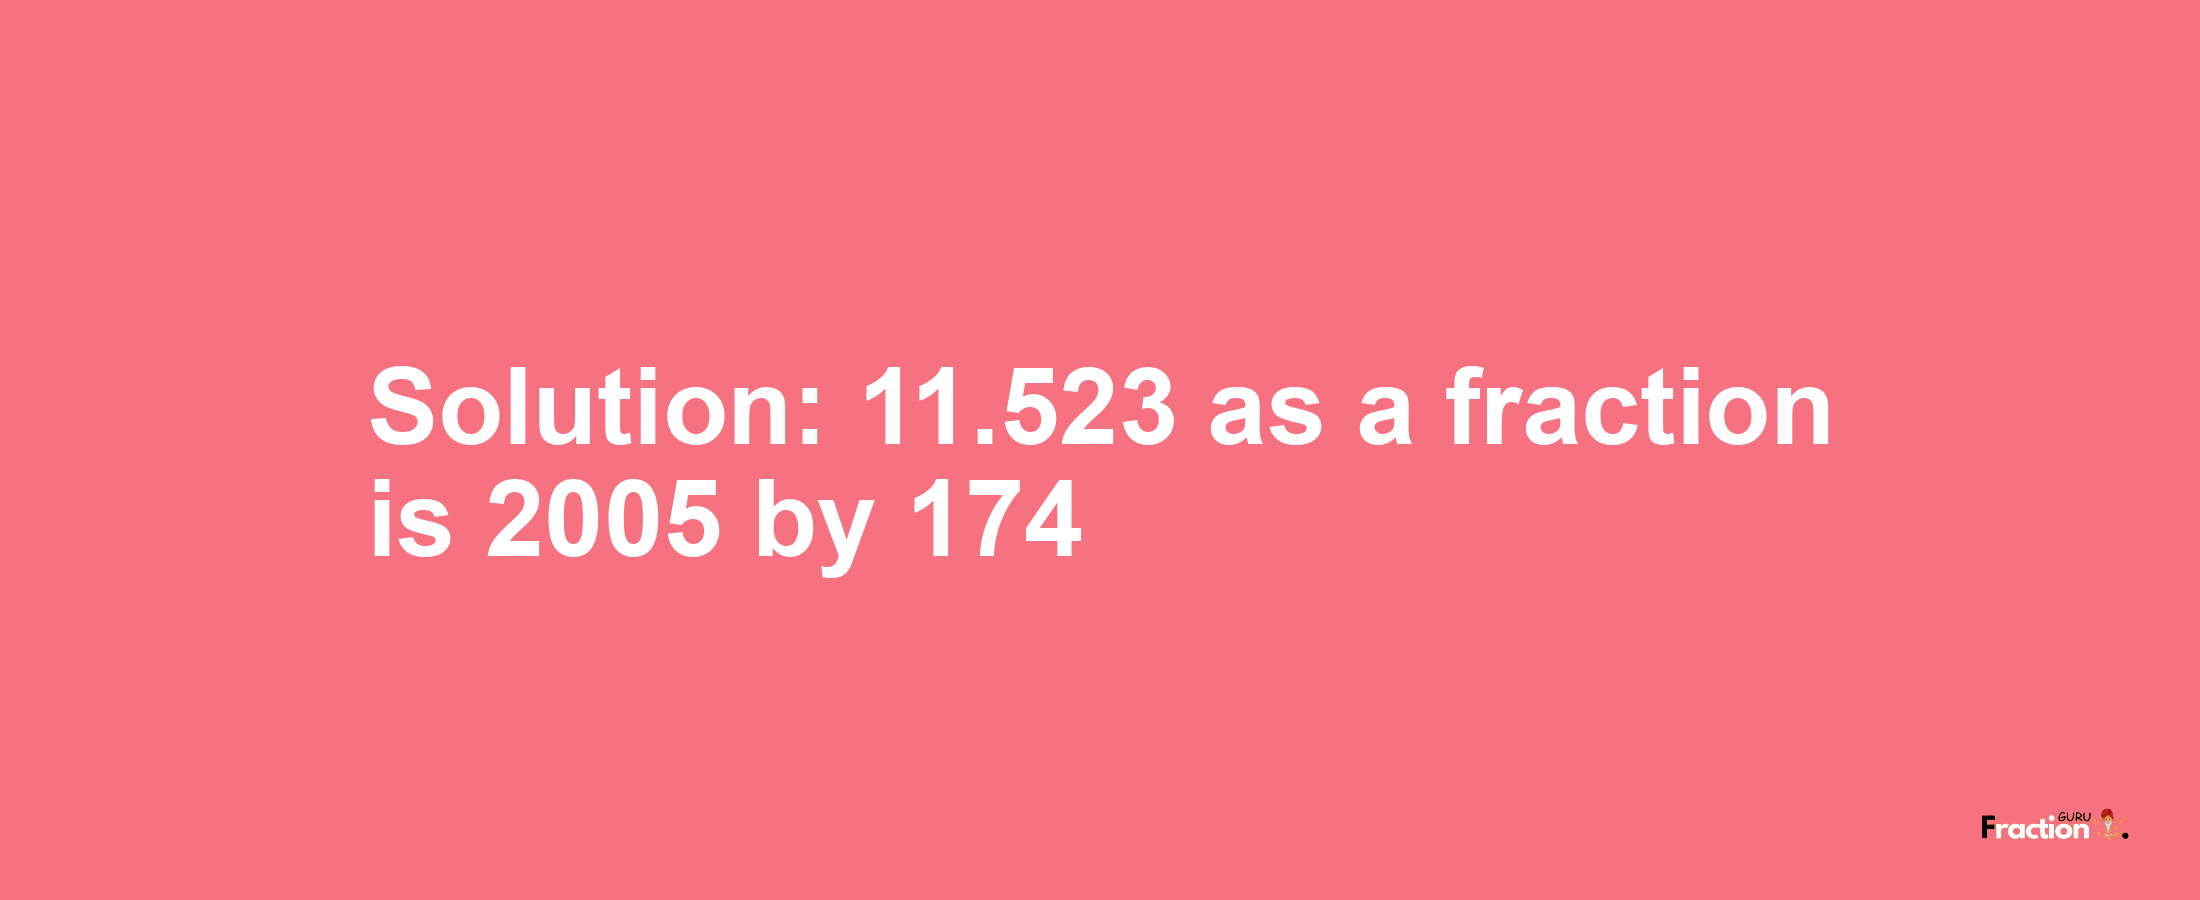 Solution:11.523 as a fraction is 2005/174